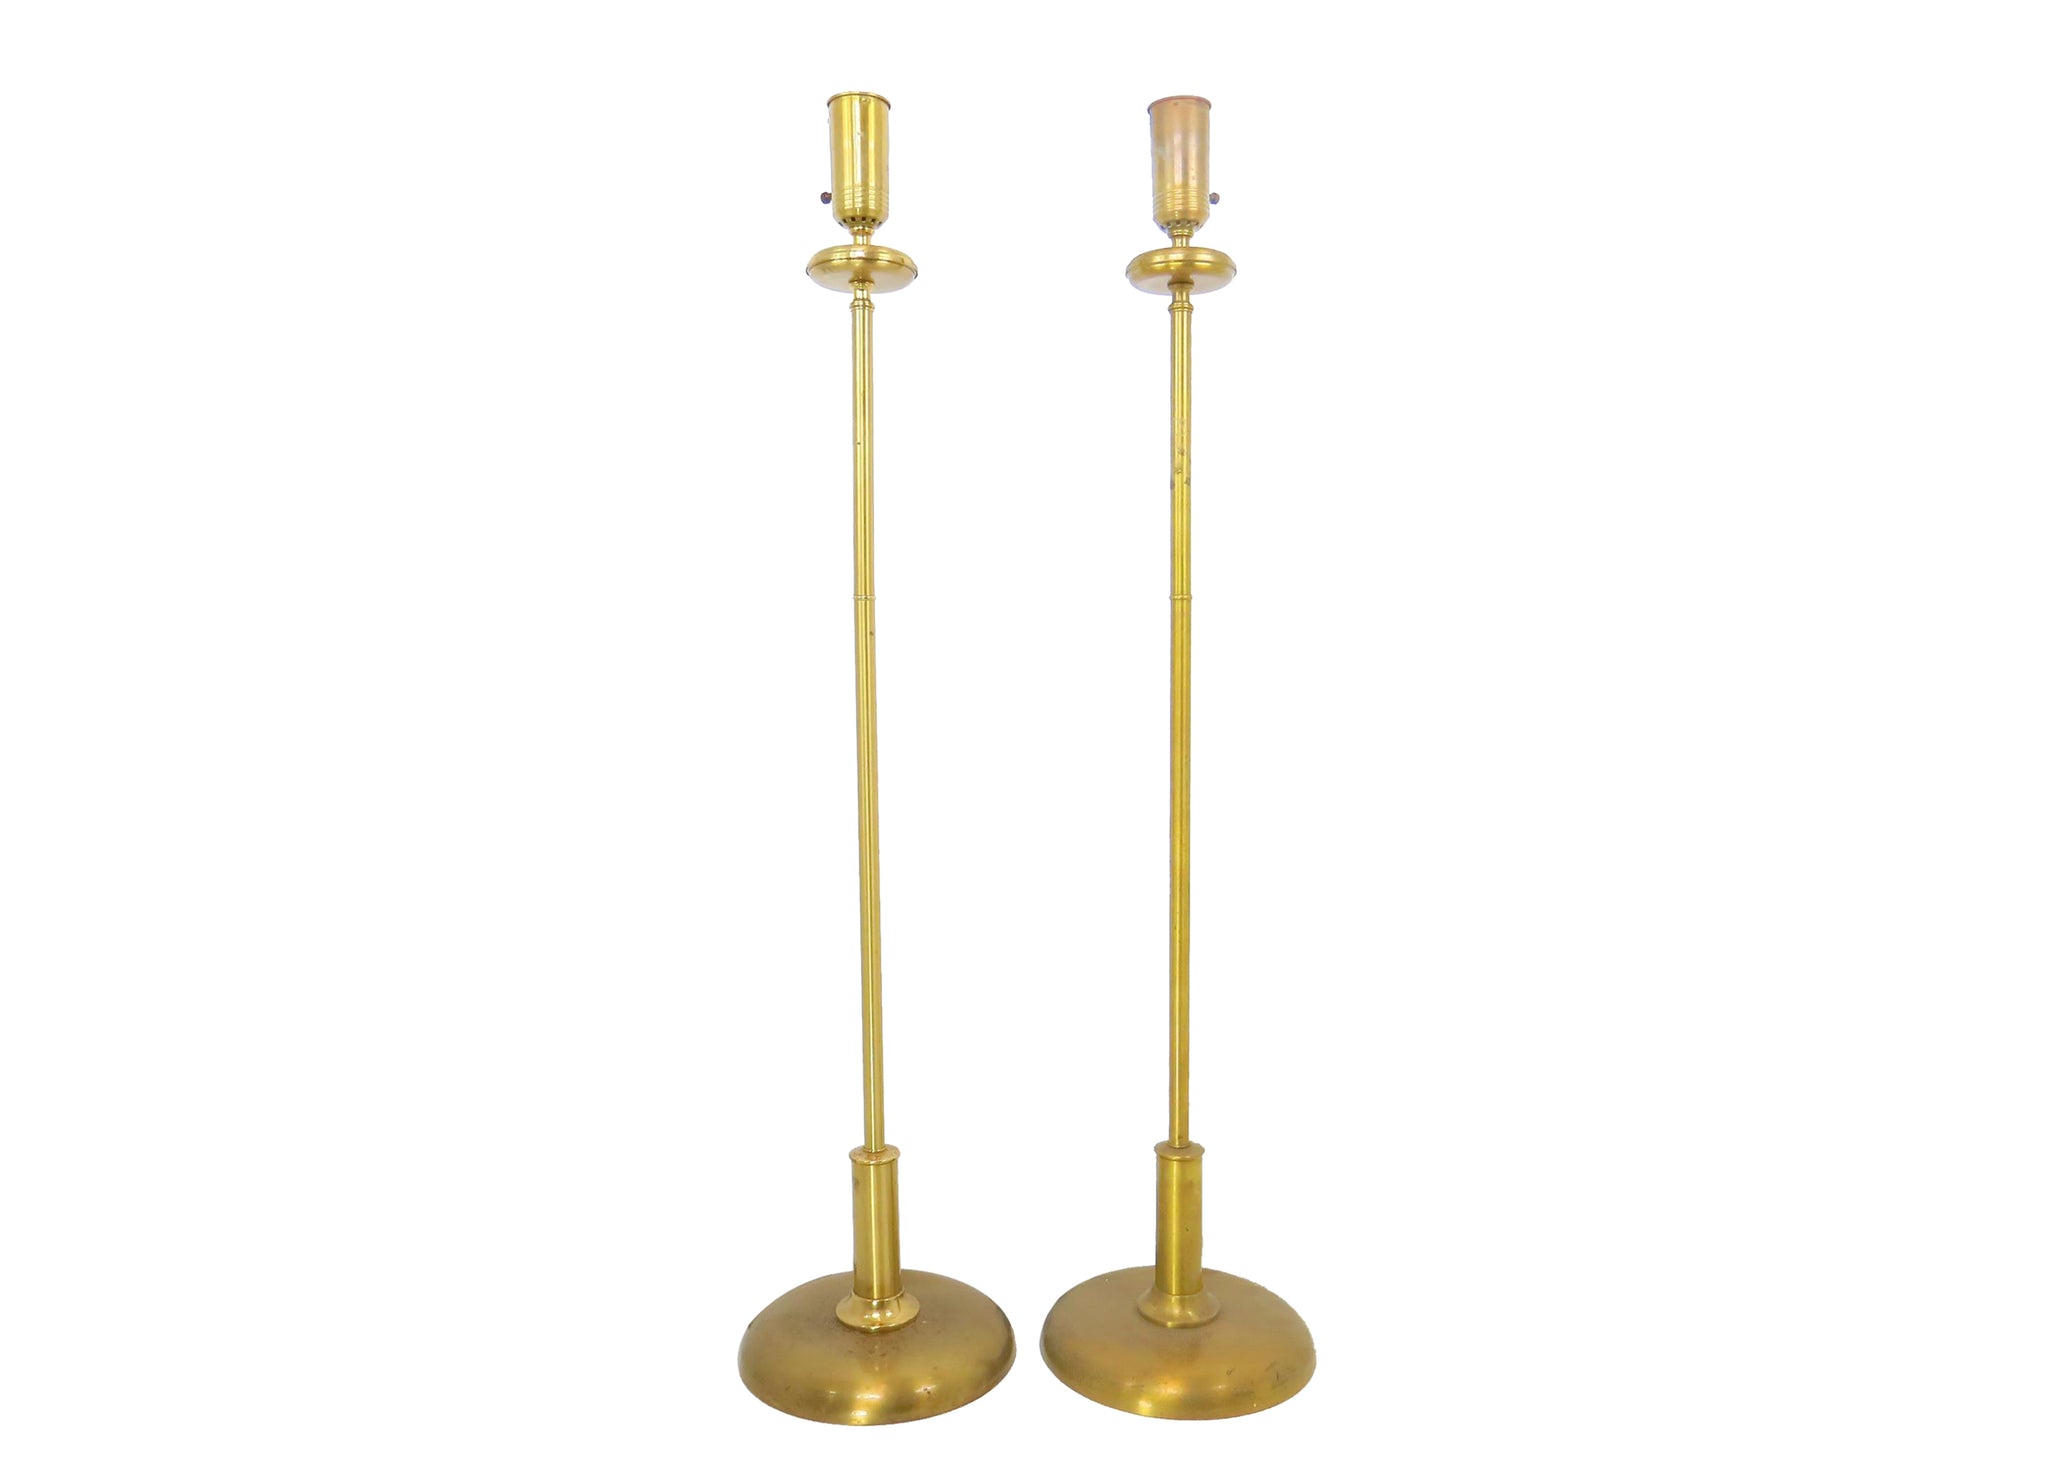 edgebrookhouse - Vintage 1940s Art Deco Solid Brass Floor Lamp Torcheres - a Pair